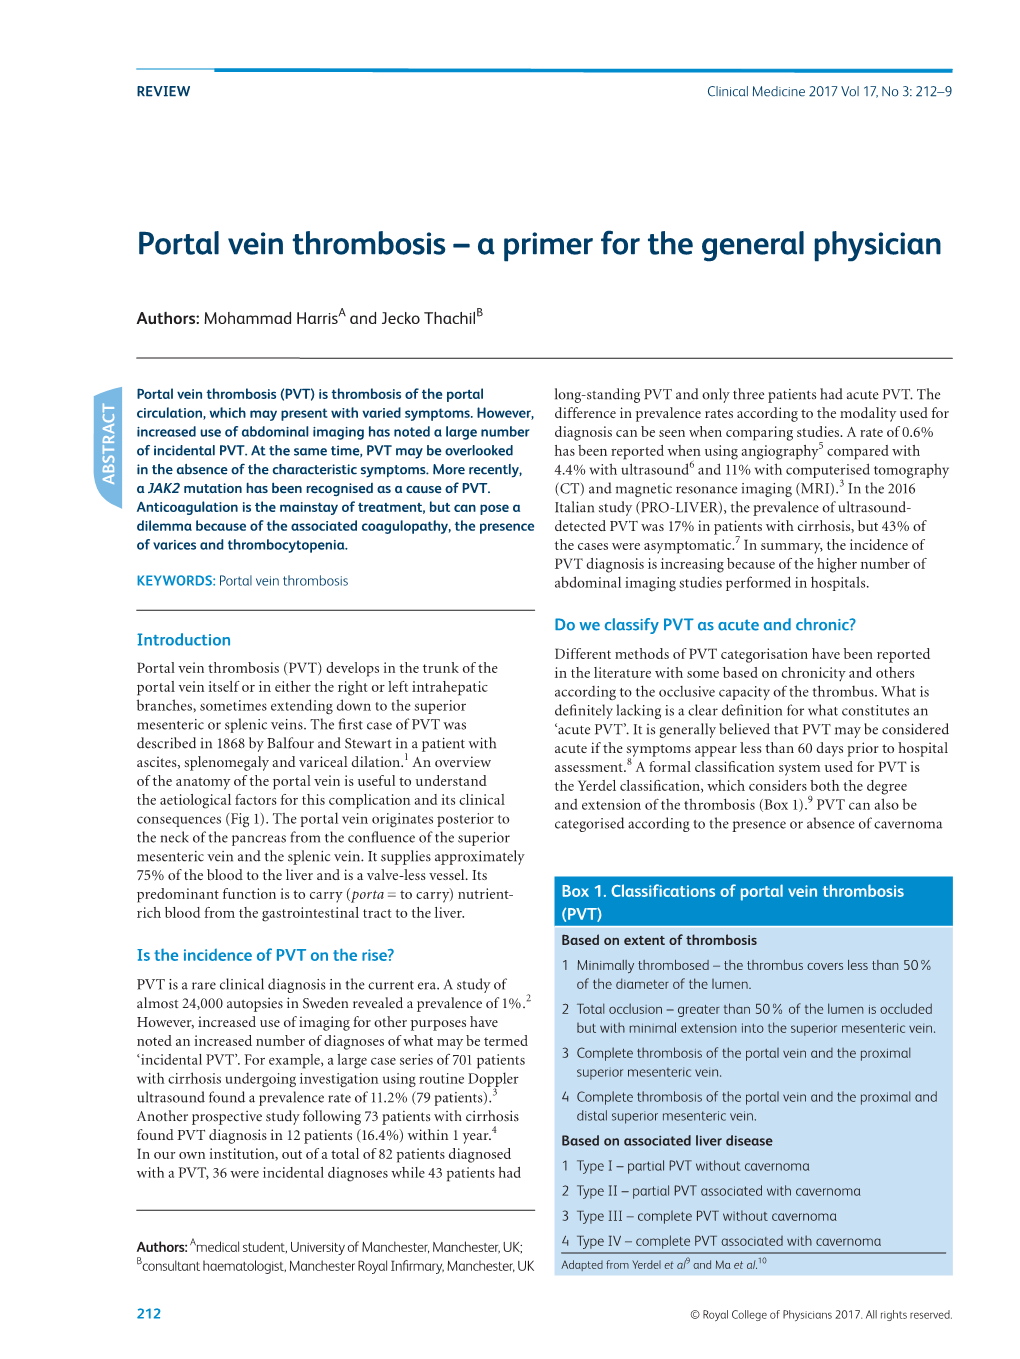 Portal Vein Thrombosis – a Primer for the General Physician